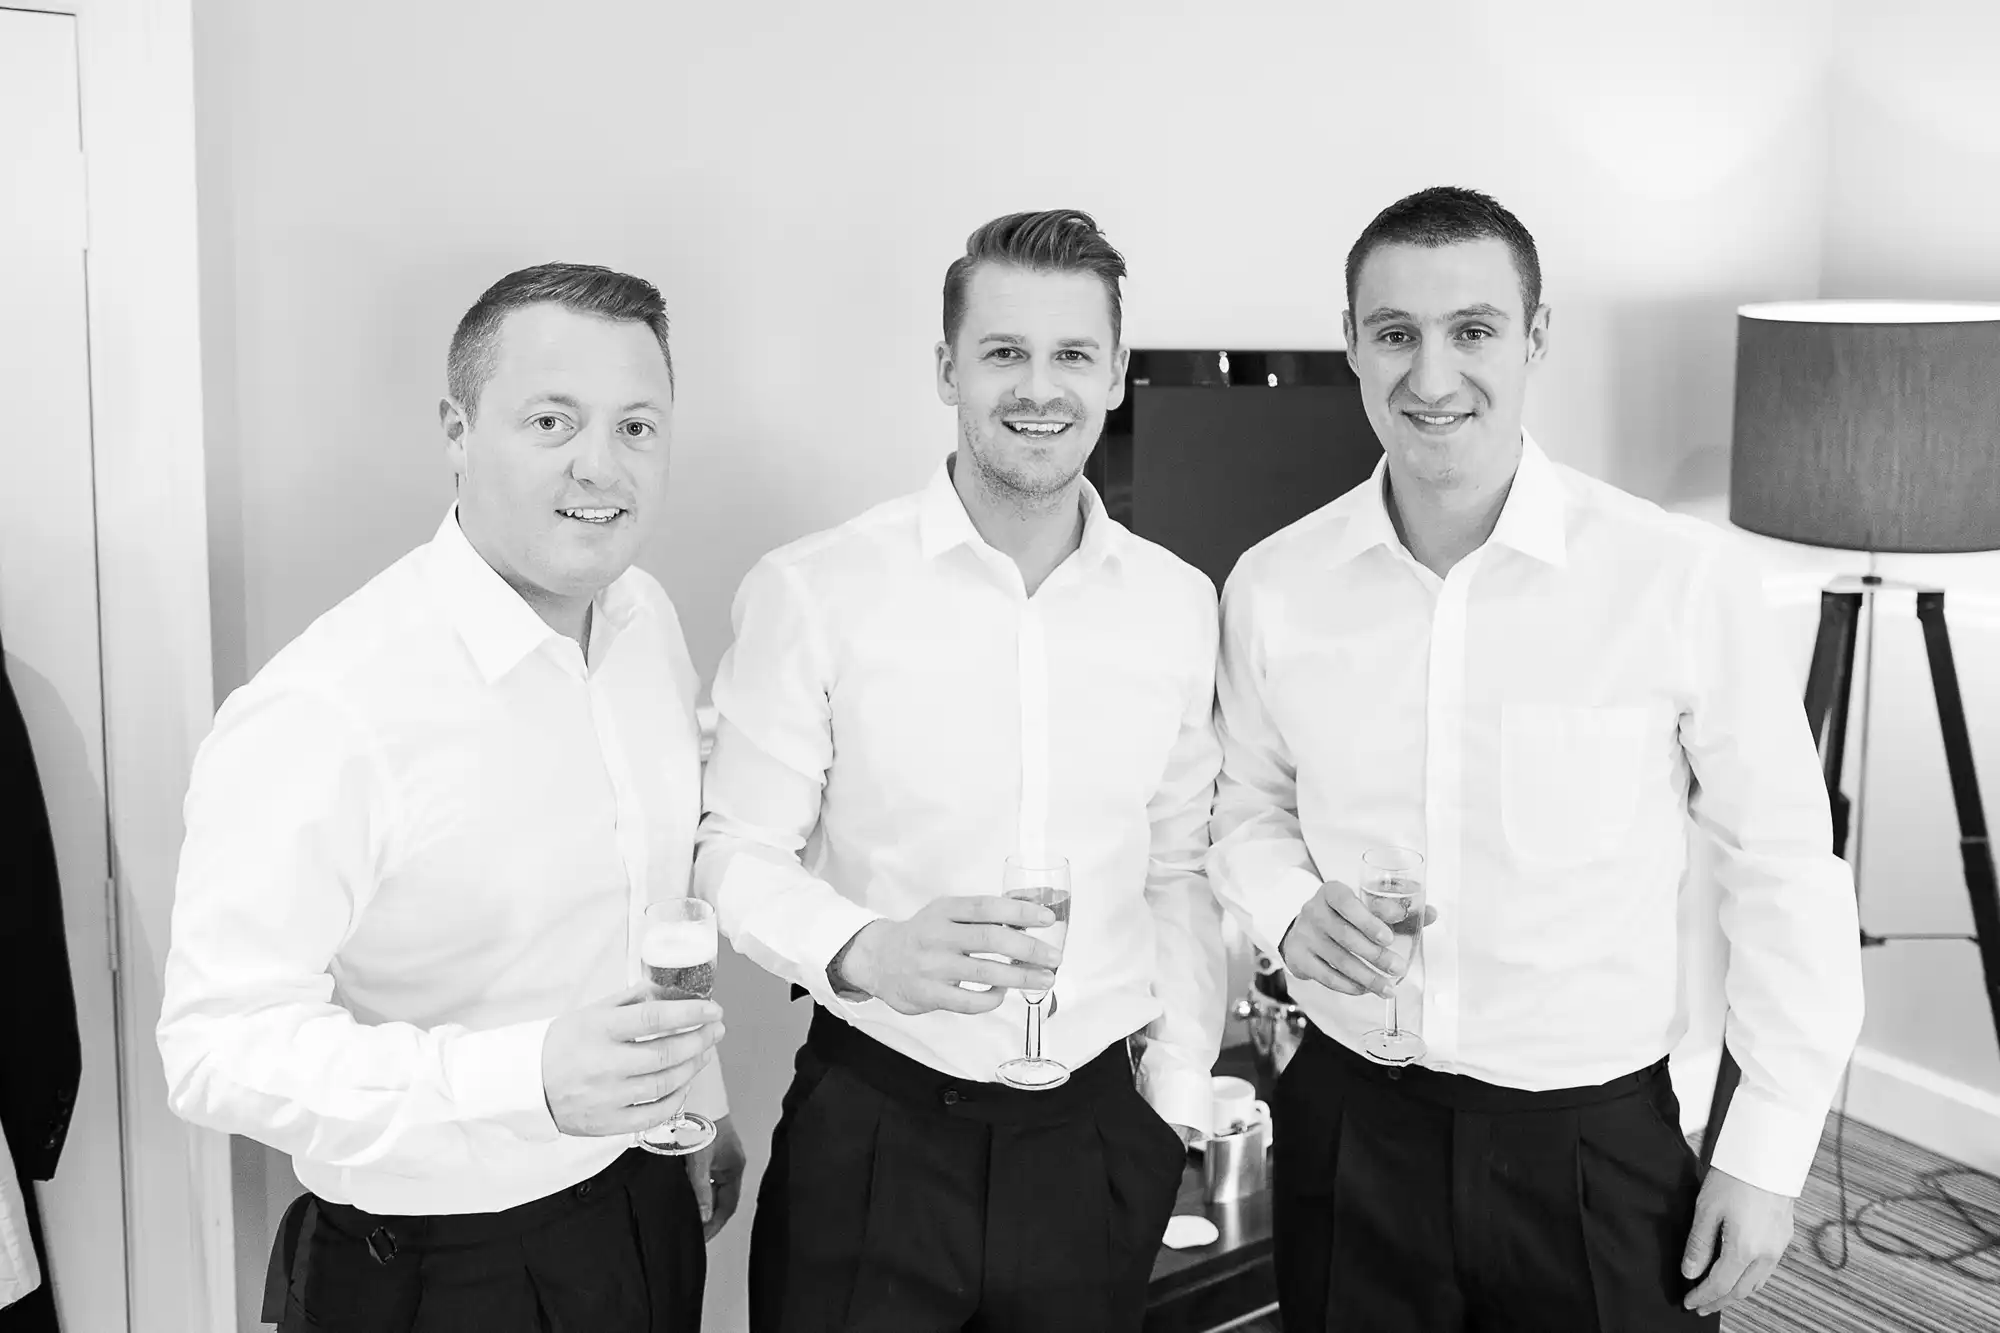 Three men in white shirts holding champagne glasses, smiling in a black and white photo in an indoor setting.